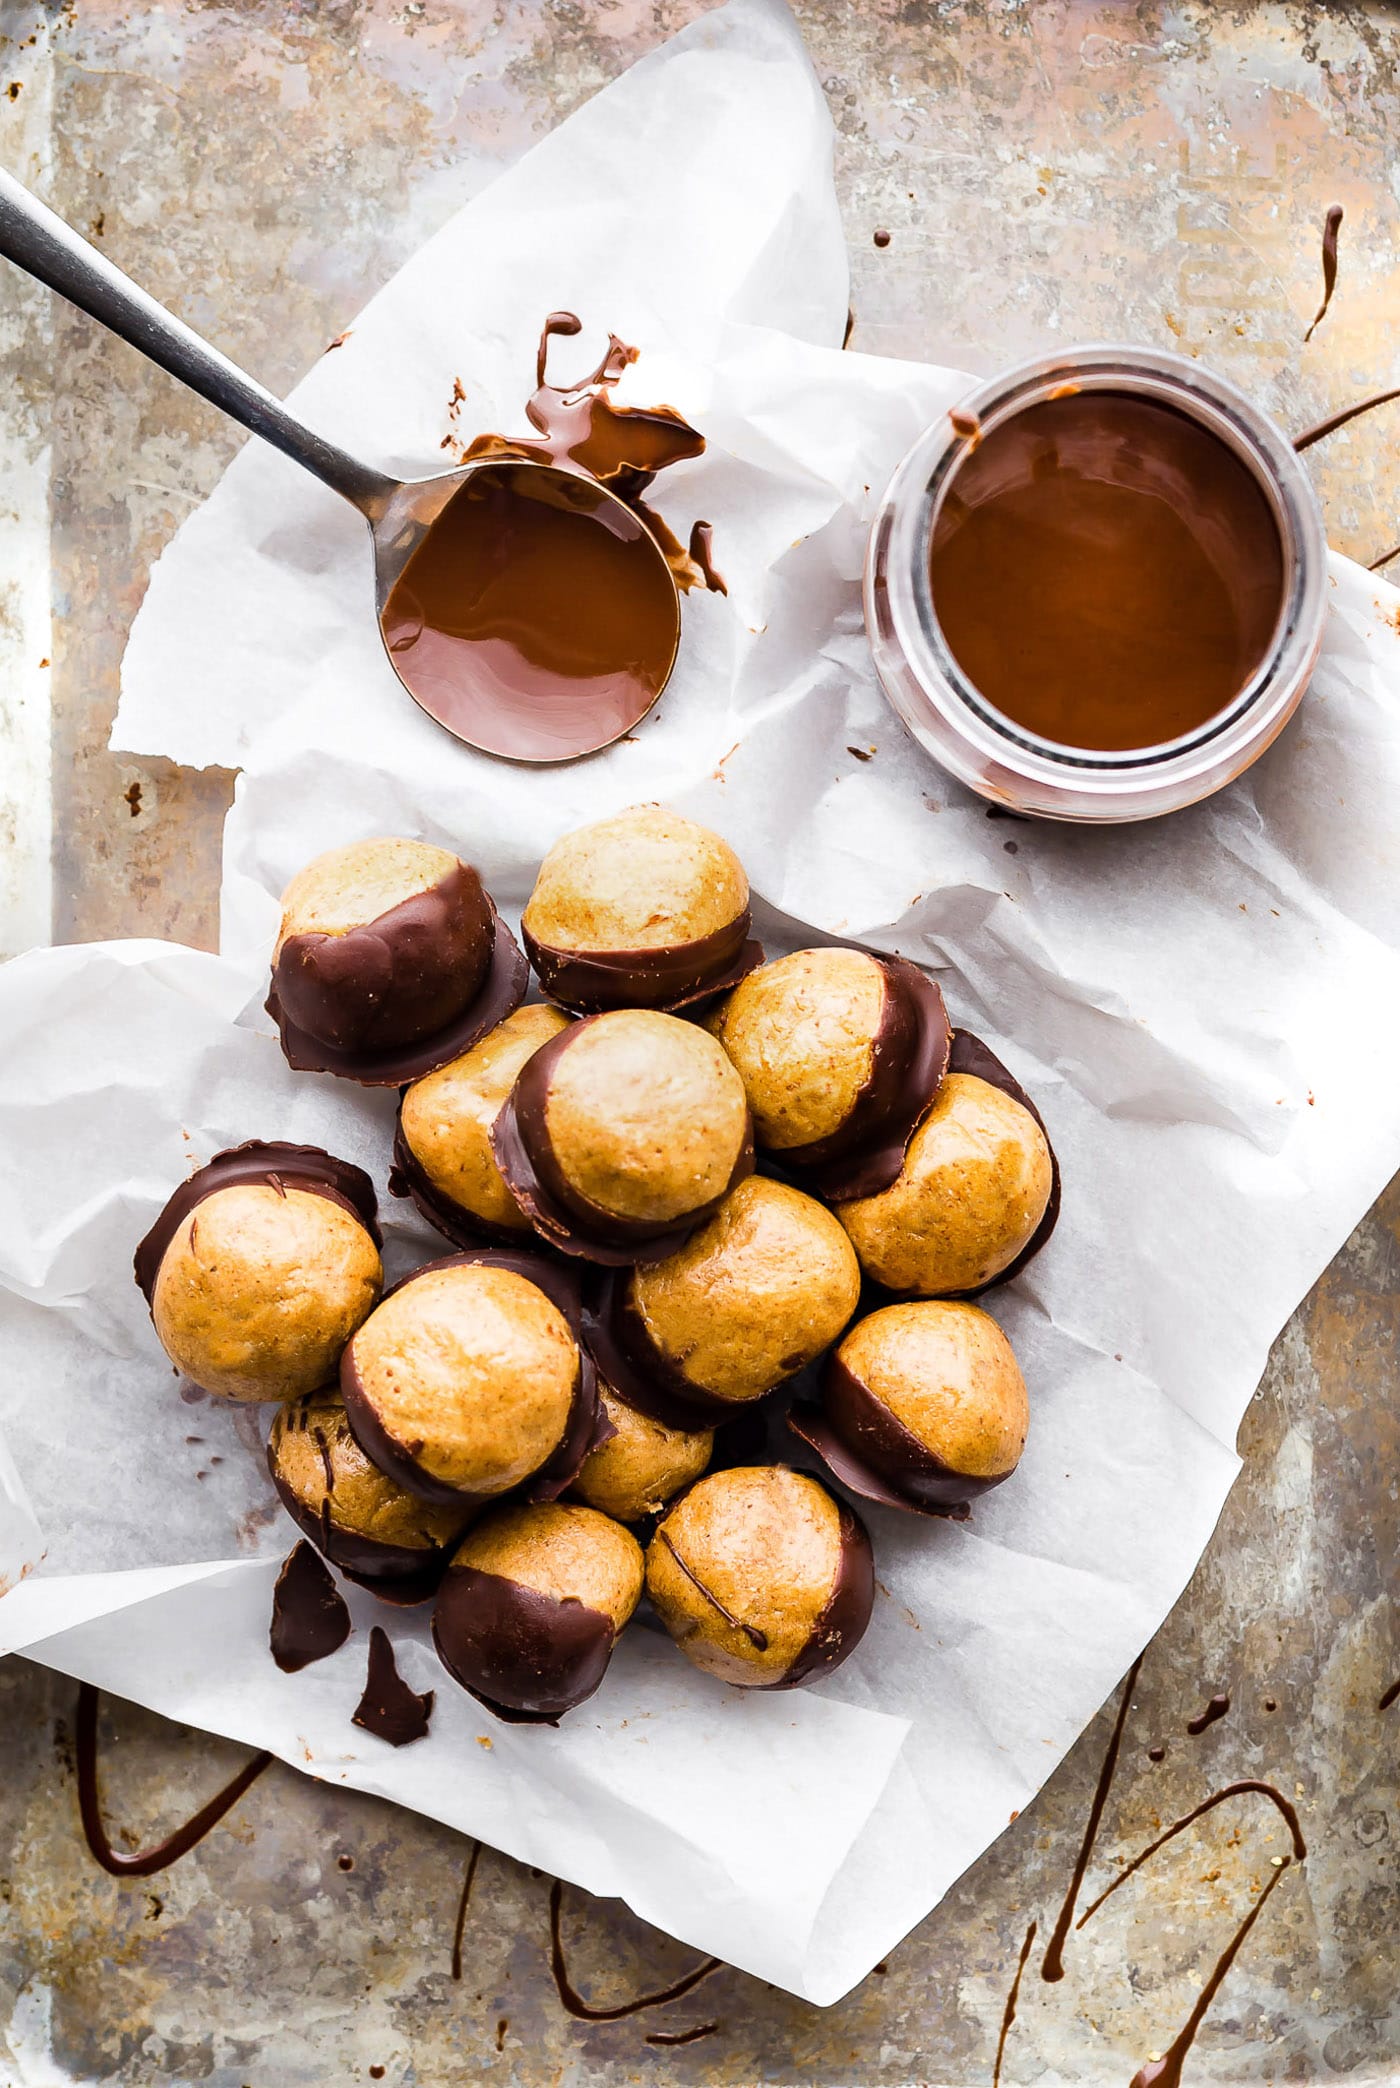 A Buckeyes Recipe Packed with Protein! These Vegan Peanut Butter Protein Buckeyes are super easy to make and coated in dairy free dark chocolate. Gluten free with a Paleo option. A classic Buckeyes Recipe with a healthy boost! No baking required so make as many as you can.